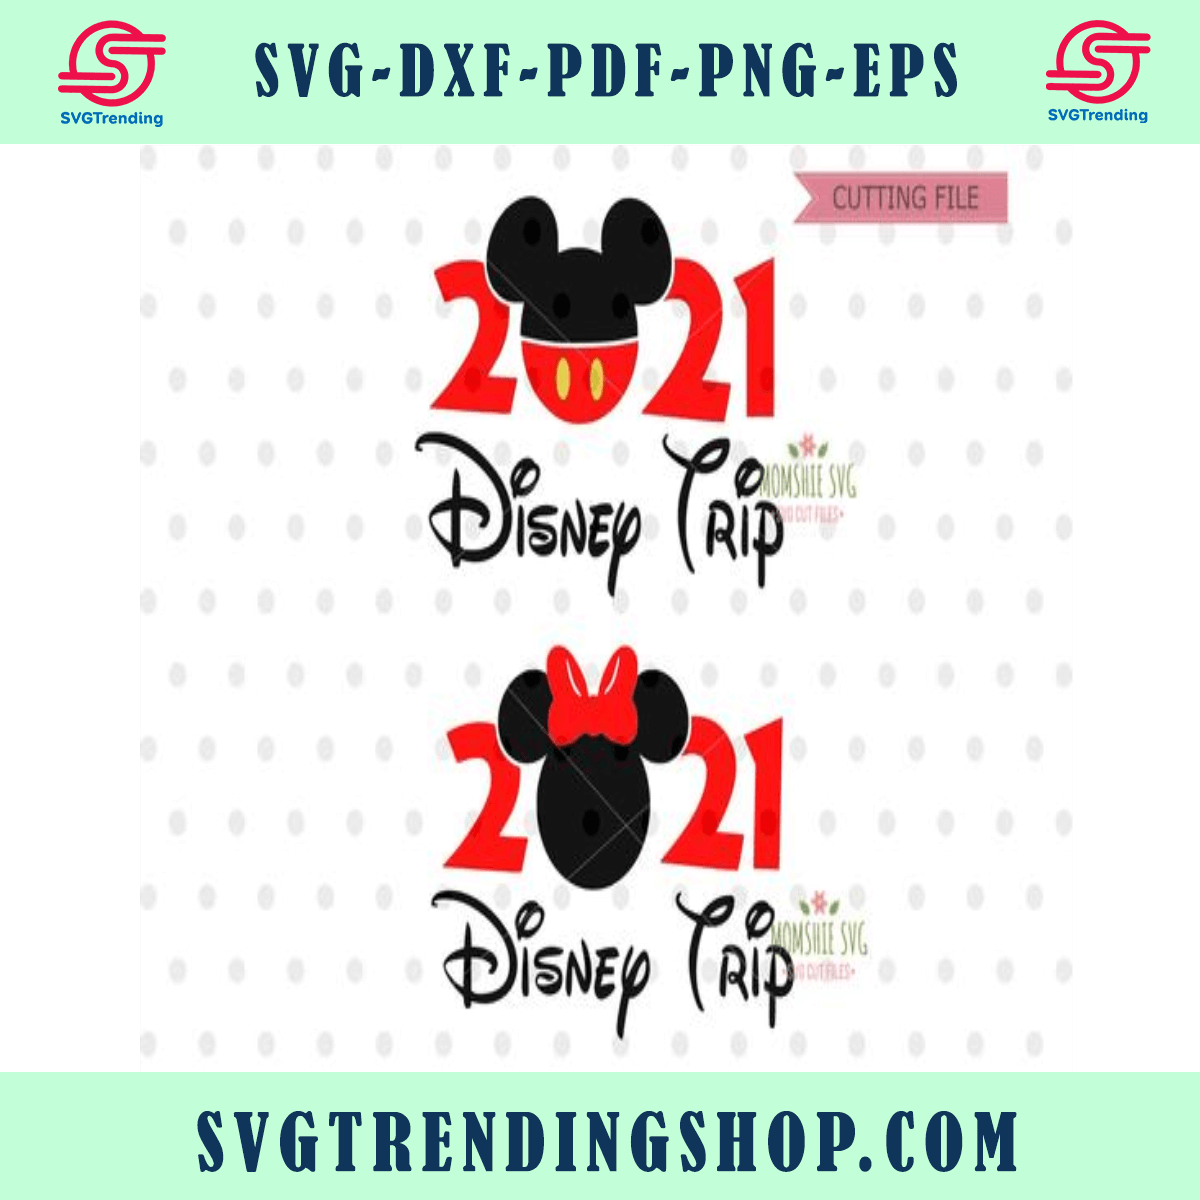 Disney Trip Svg 2021 Disney Trip Svg Disney Goals Png Etsy Uk Images And Photos Finder 